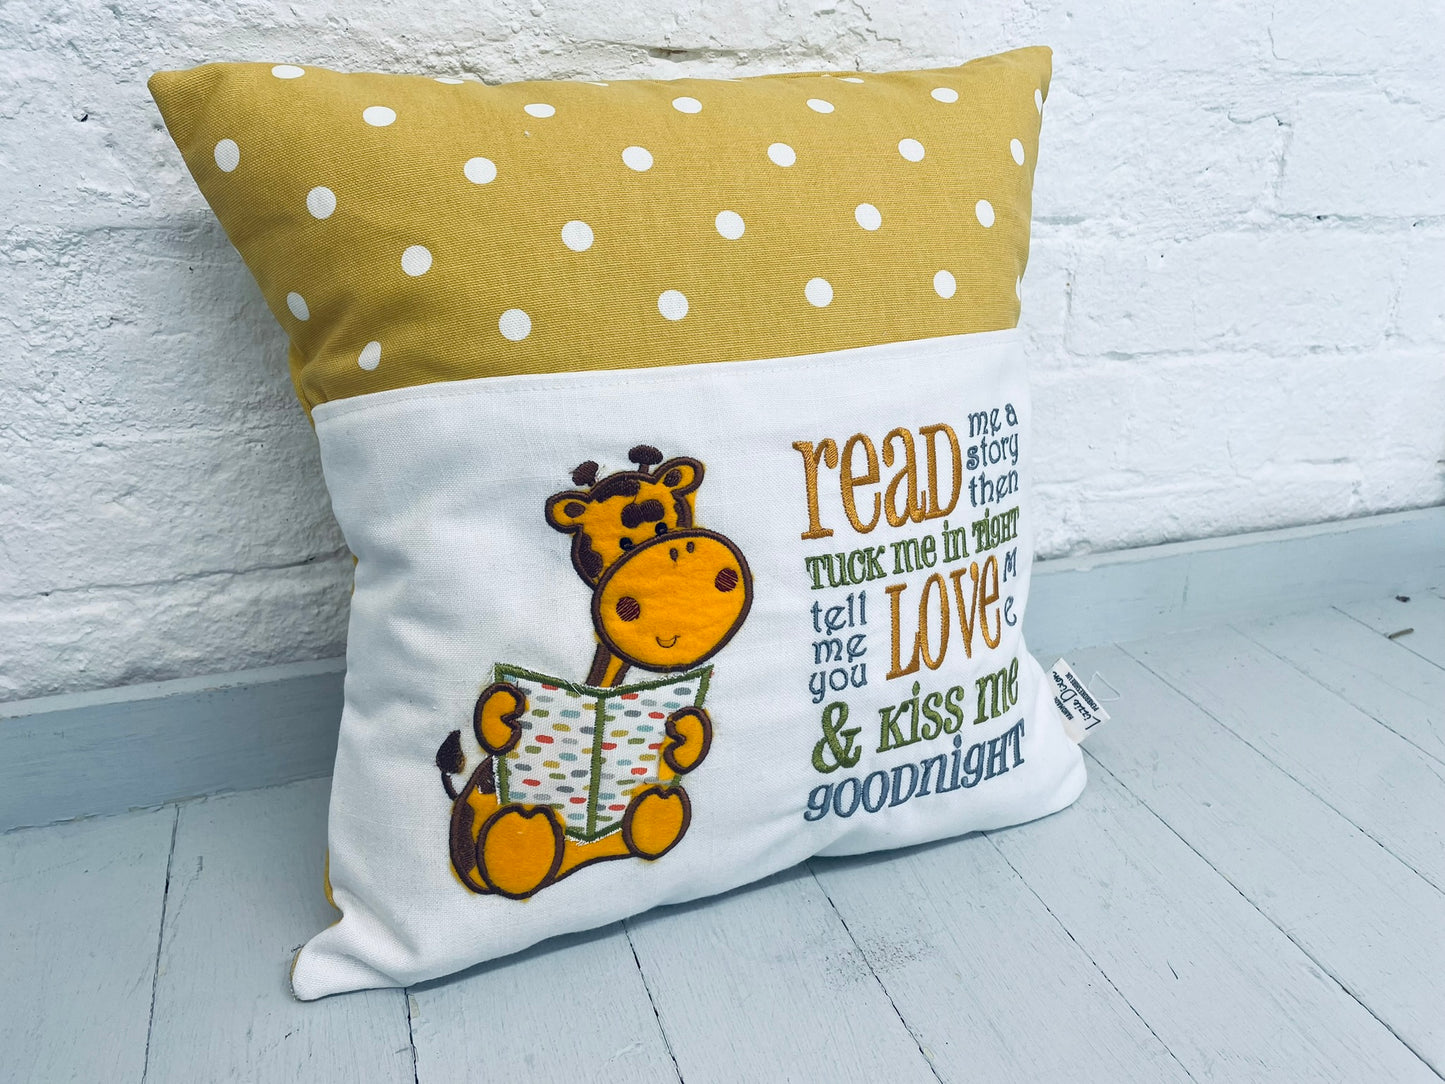 Giraffe with a welsh saying Children's Reading book Cushion.